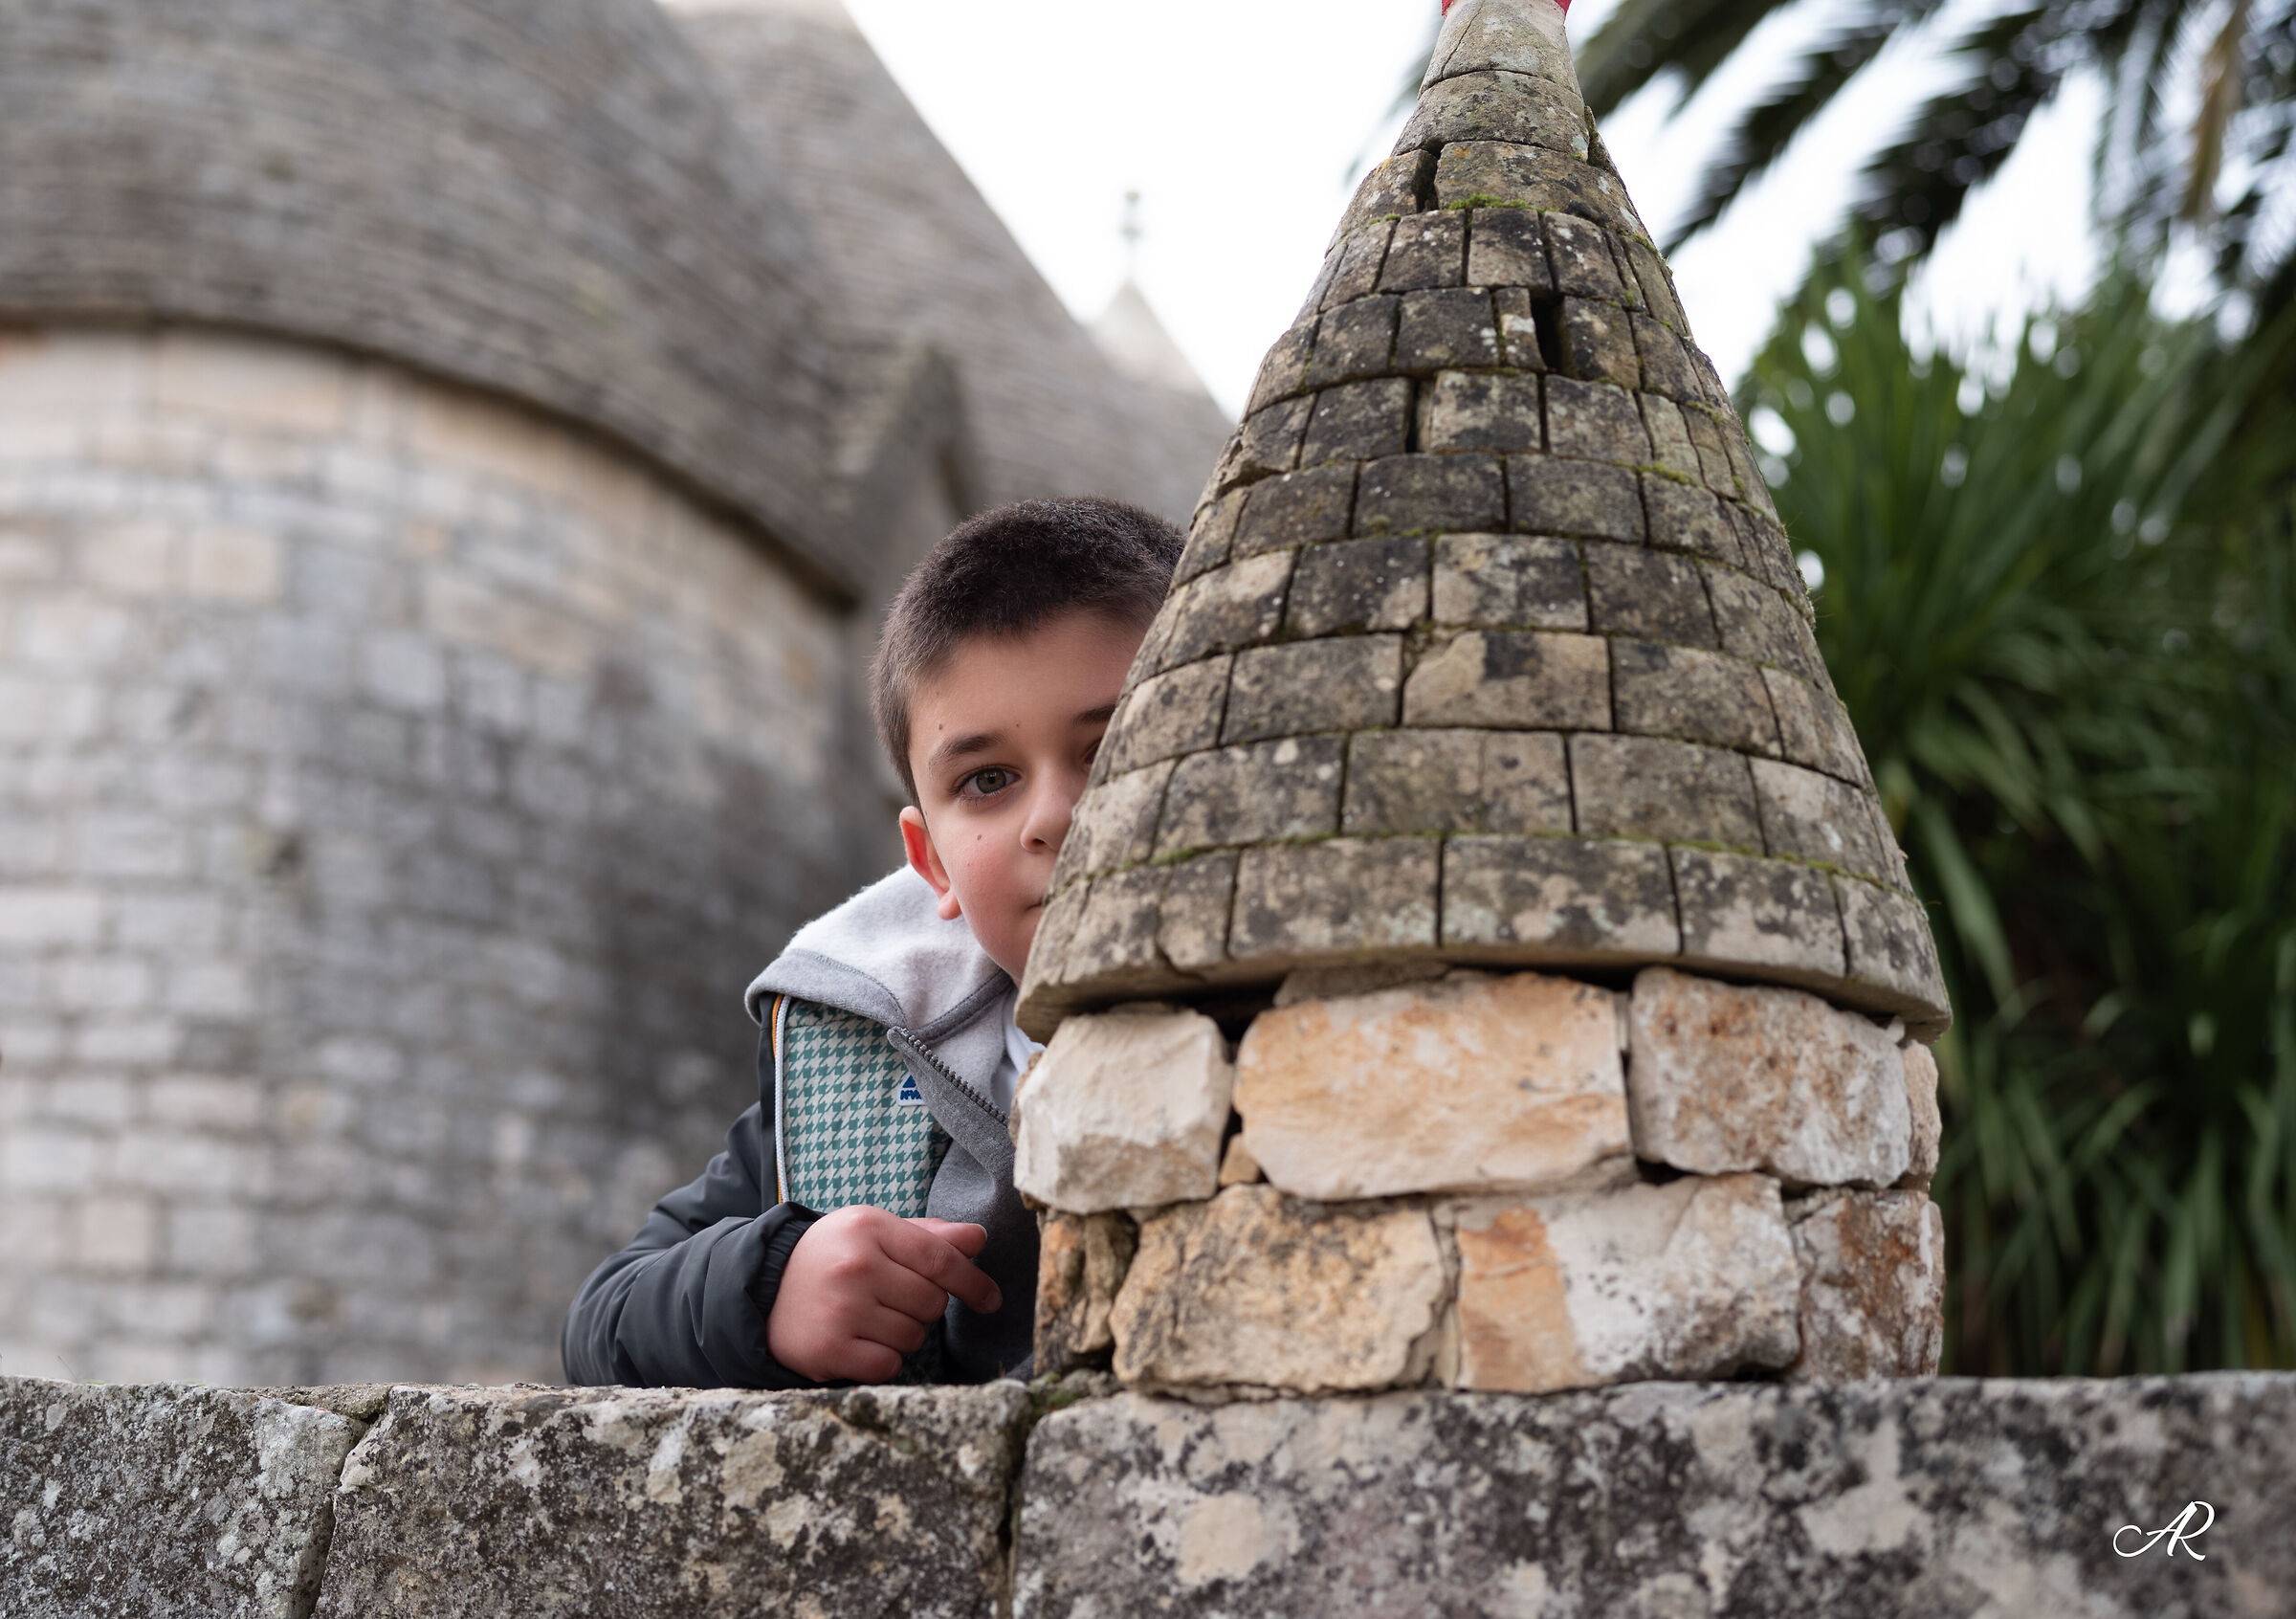 A hide and seek among the trulli...